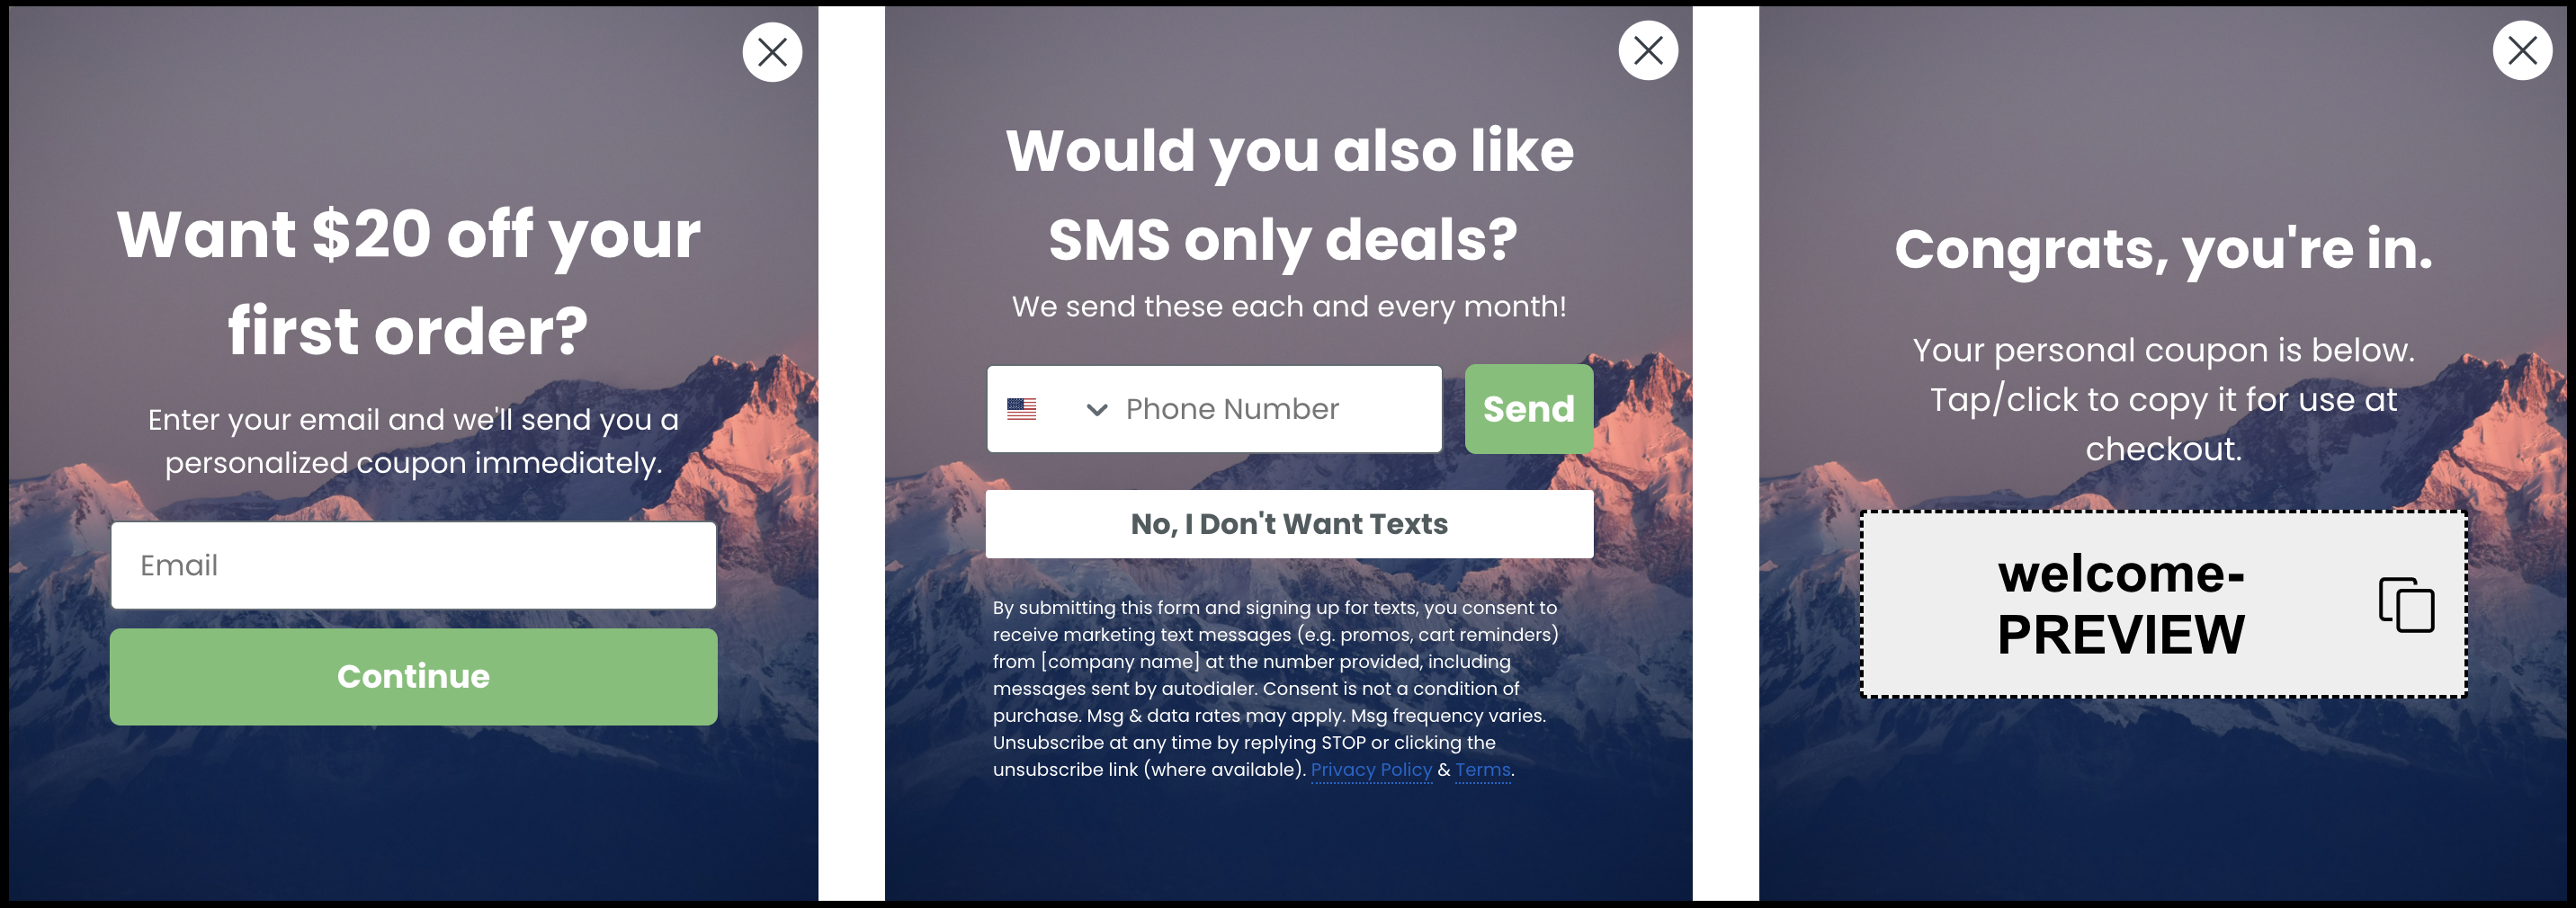 Klaviyo popup example for email and SMS